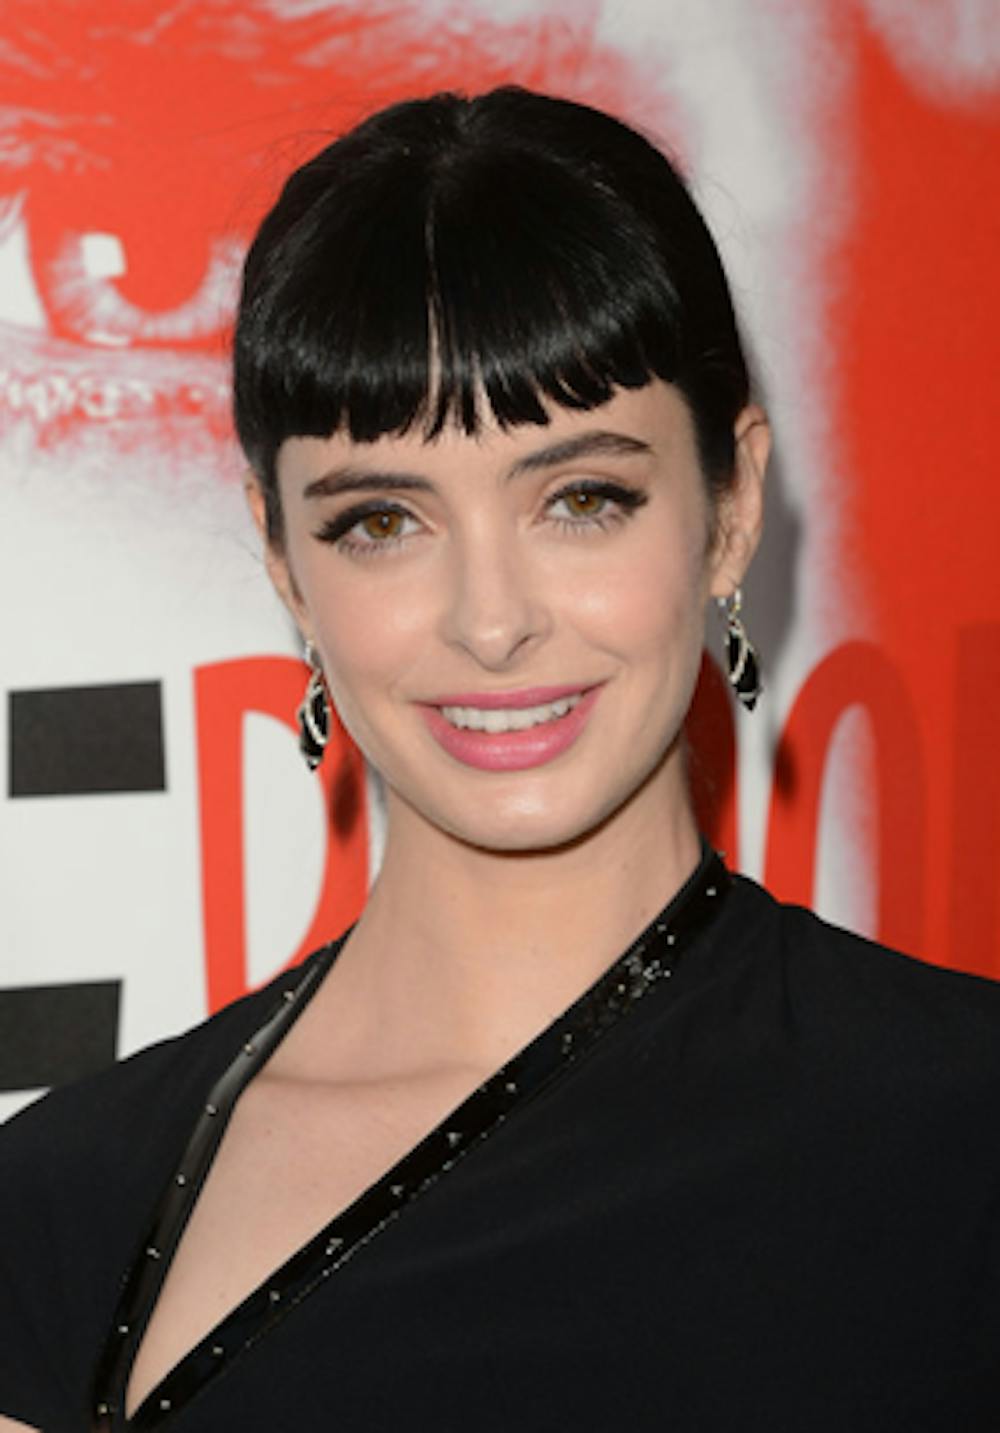 KYLELUKERr/cc-by-SA 2.0
Krysten Ritter portrays the title character in this new Marvel series.